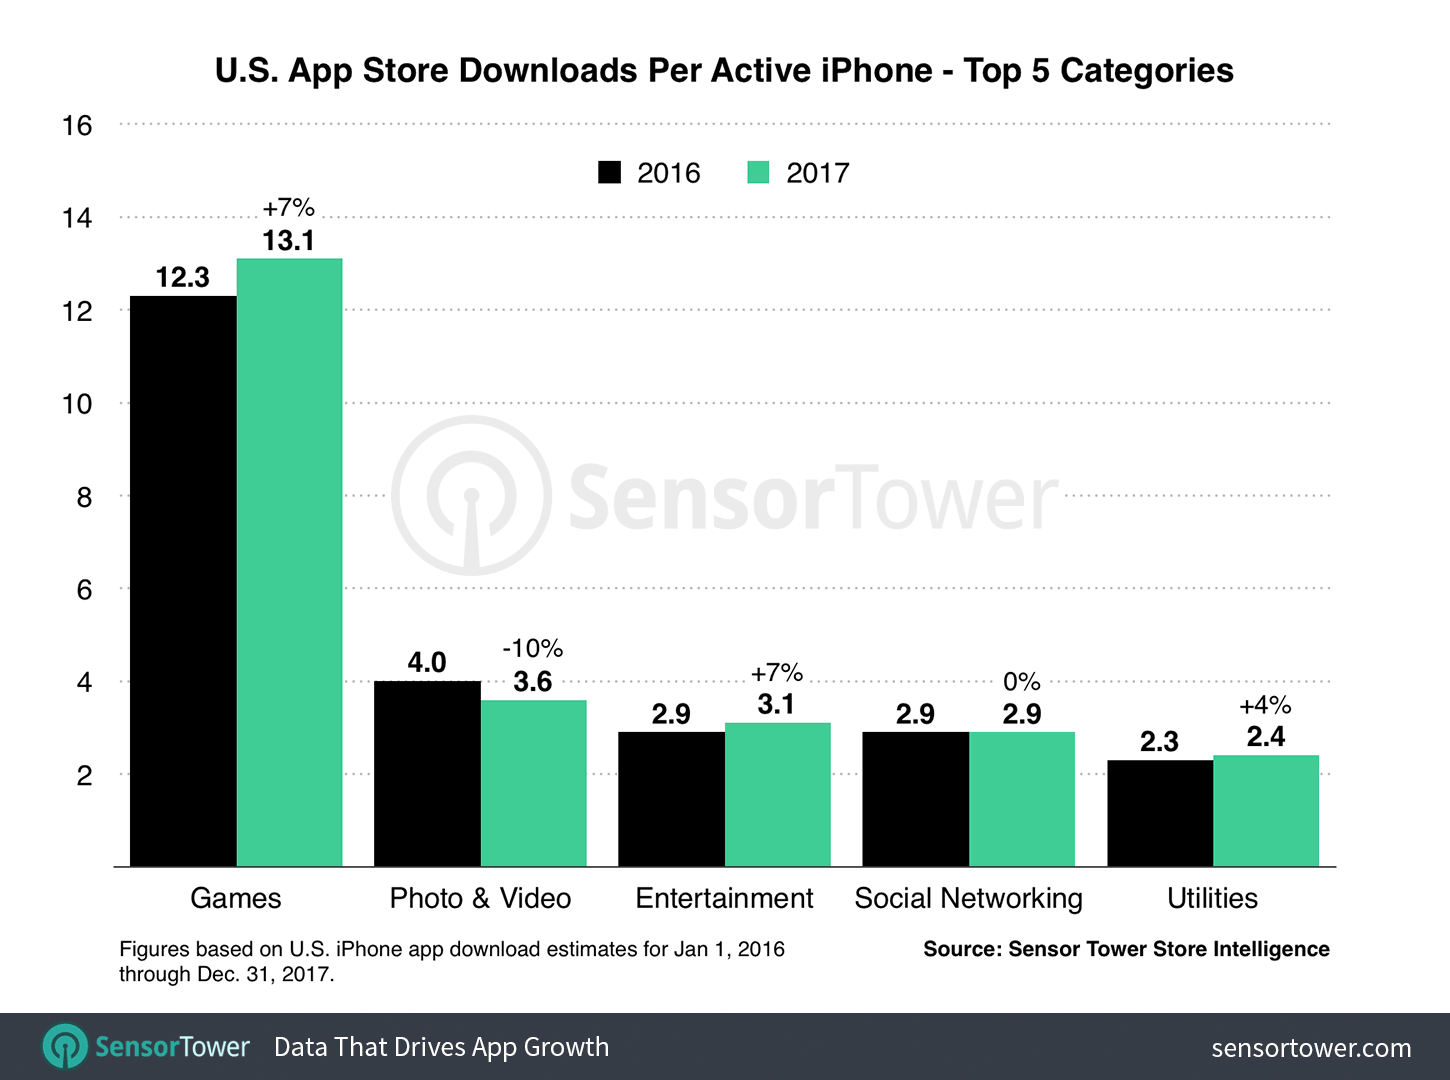 U.S. iPhone Users Spent An Average of $58 on Apps in 2017